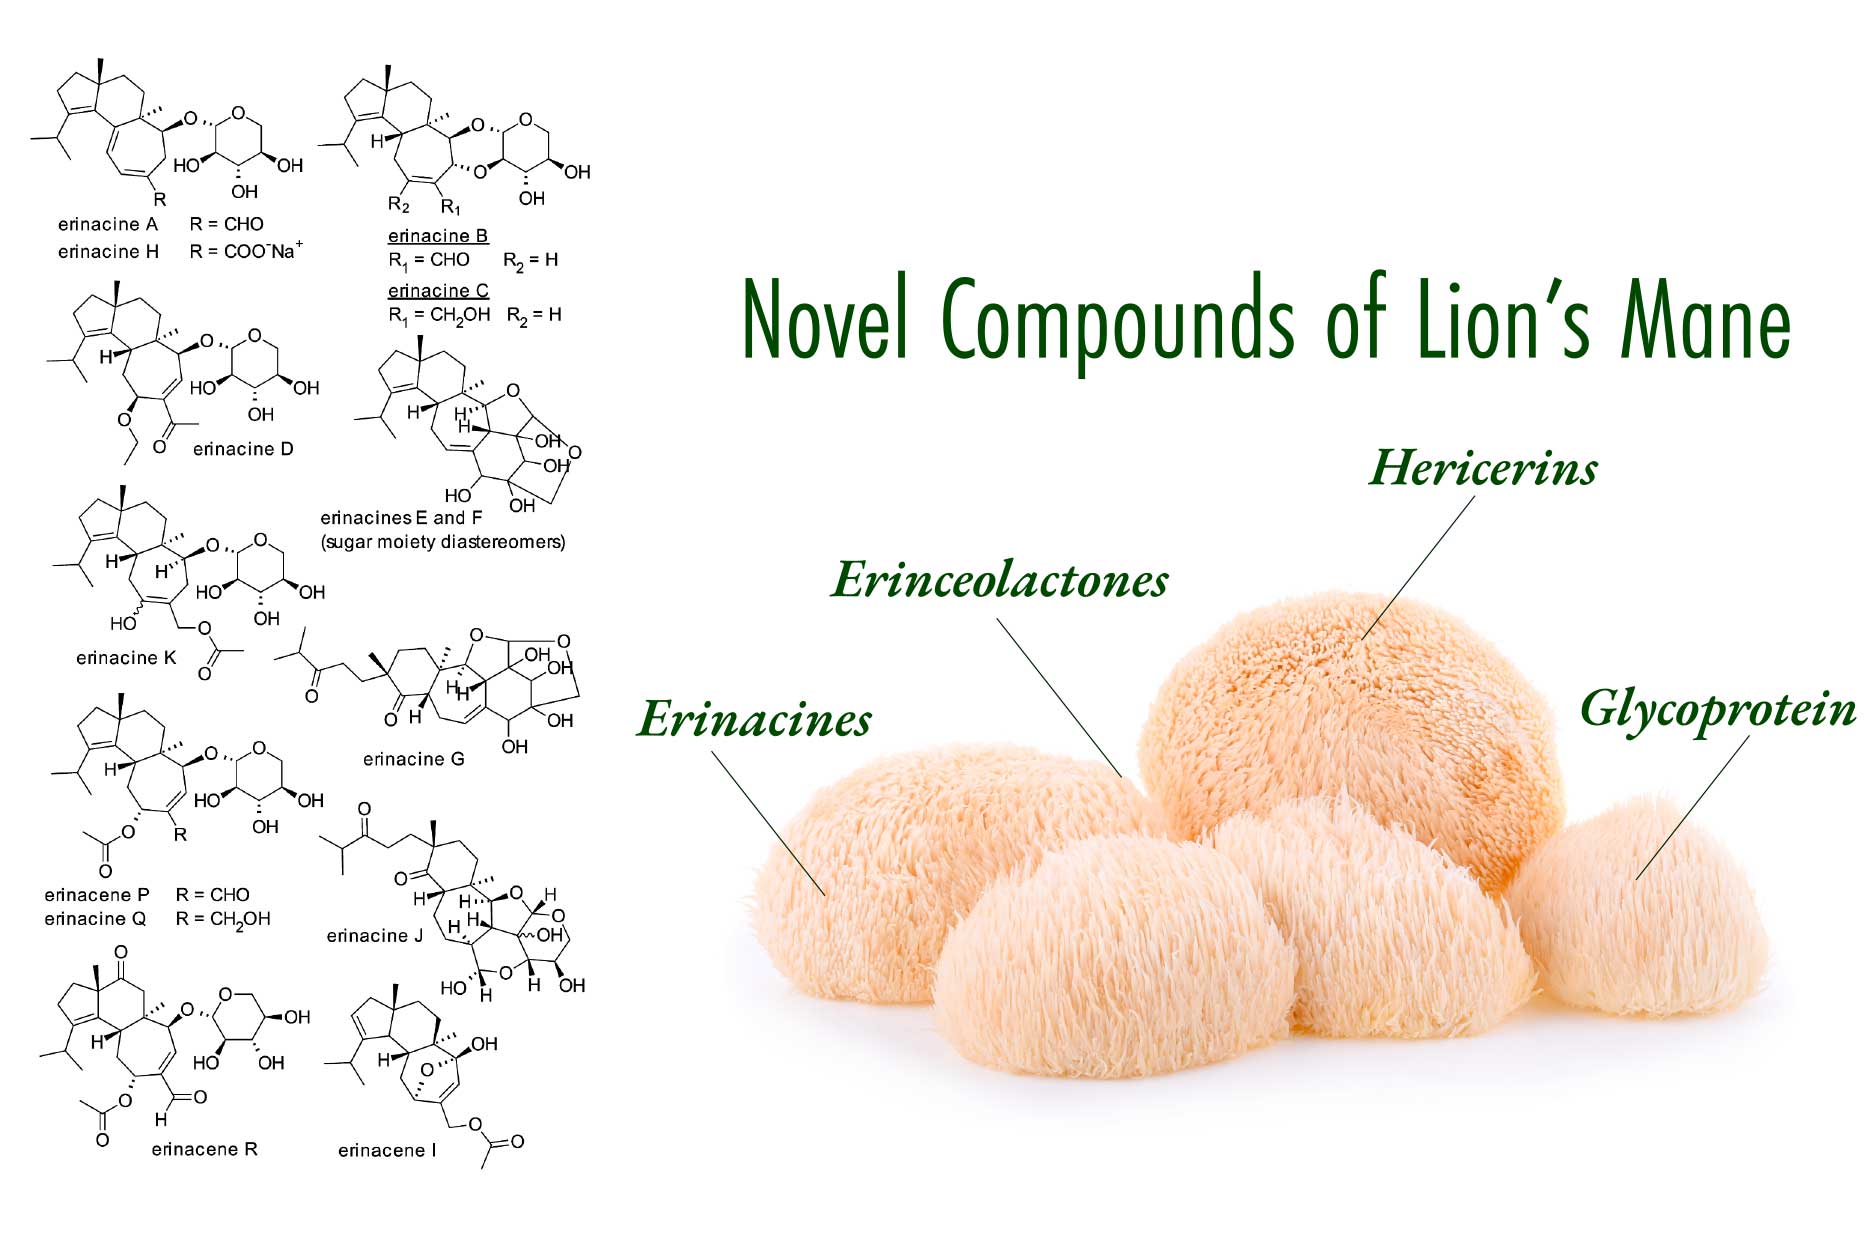 a group of lion's mane mushrooms and some of the novel compounds found in the species. 